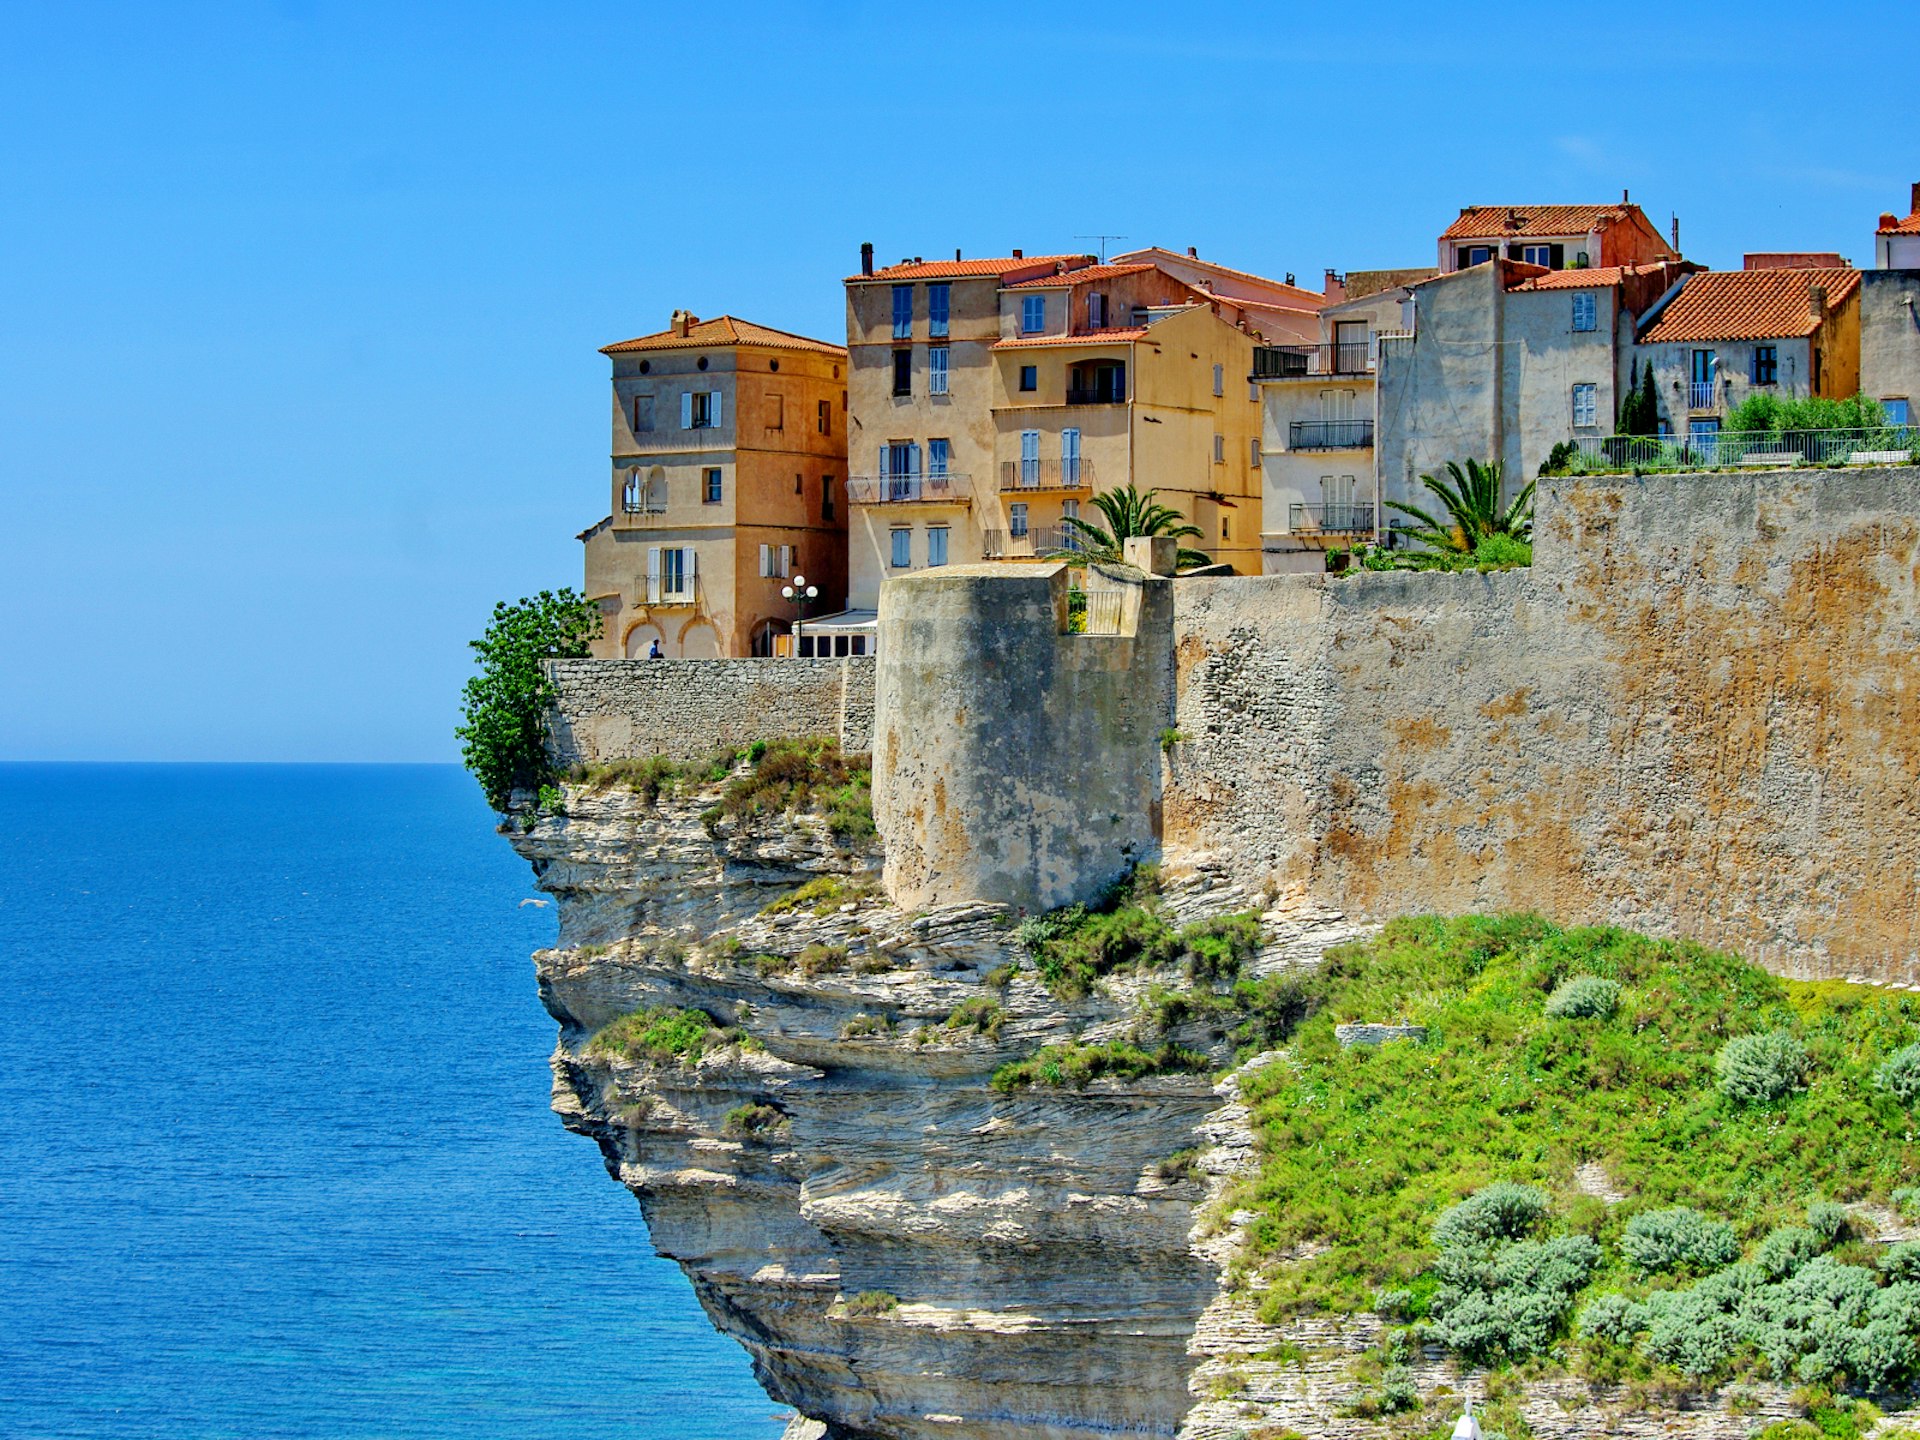 A cliff with several tall houses on top juts out over the sea